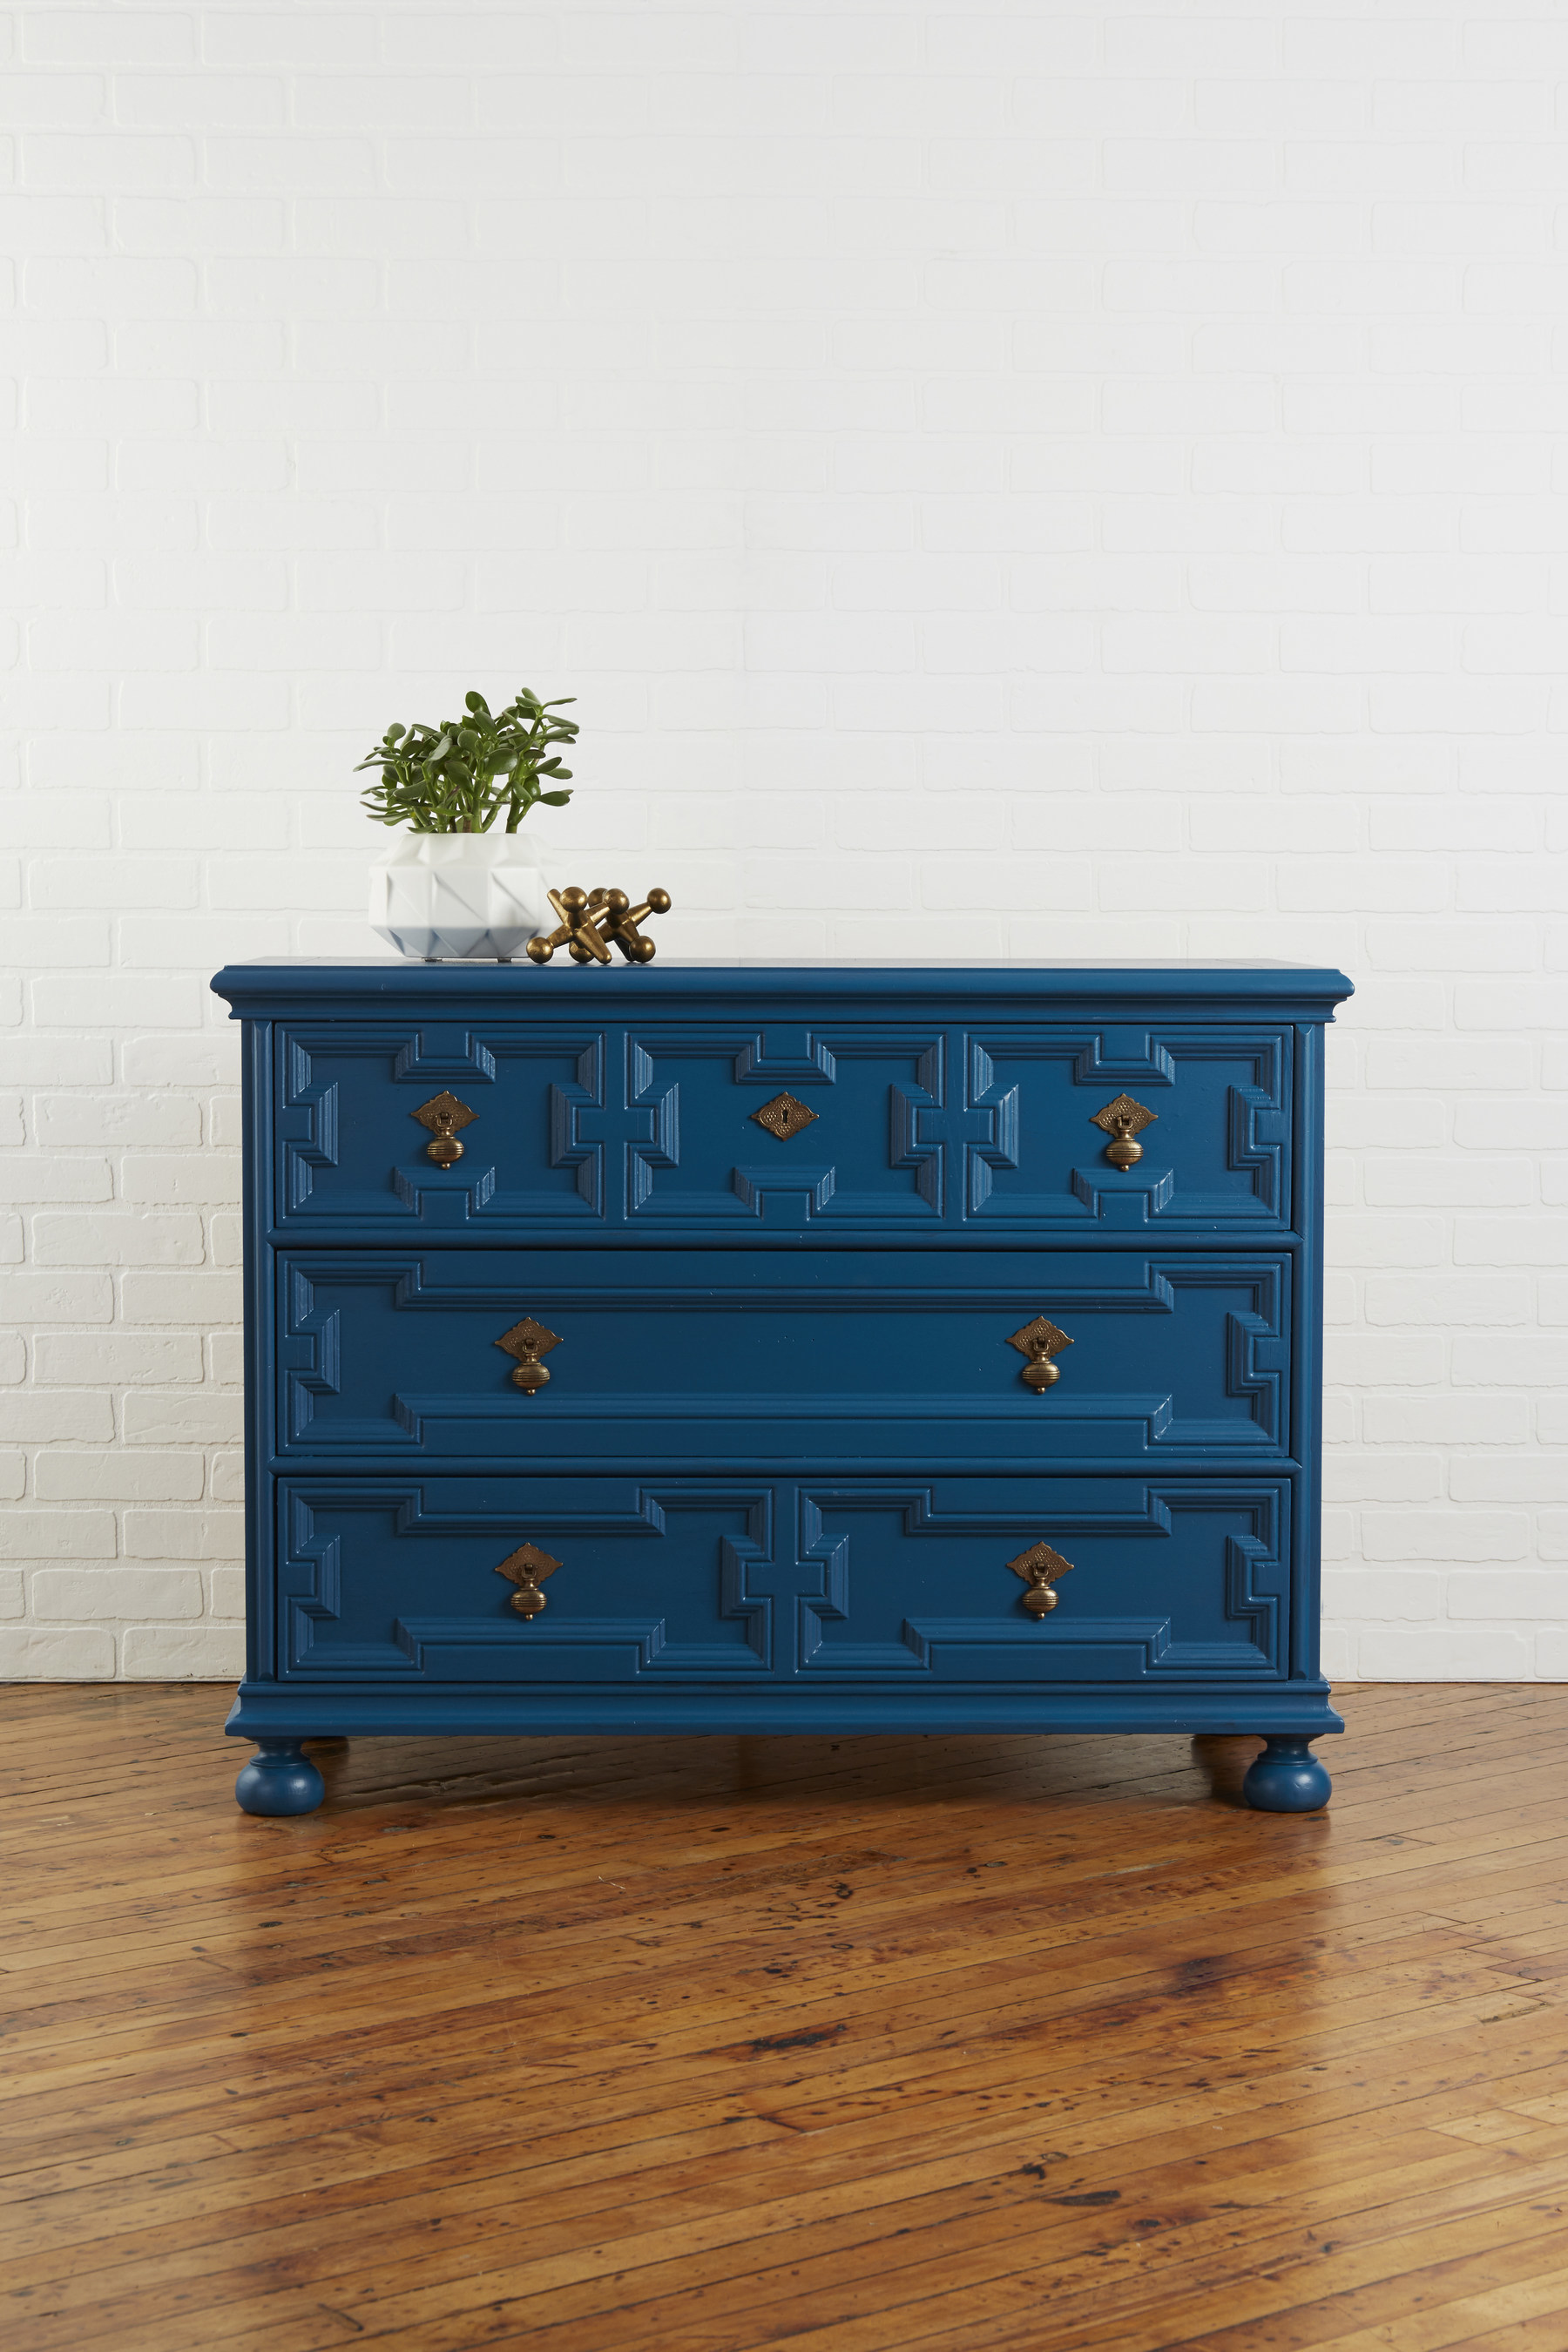 Valspar Creates New Paints Specifically For Furniture And Cabinet